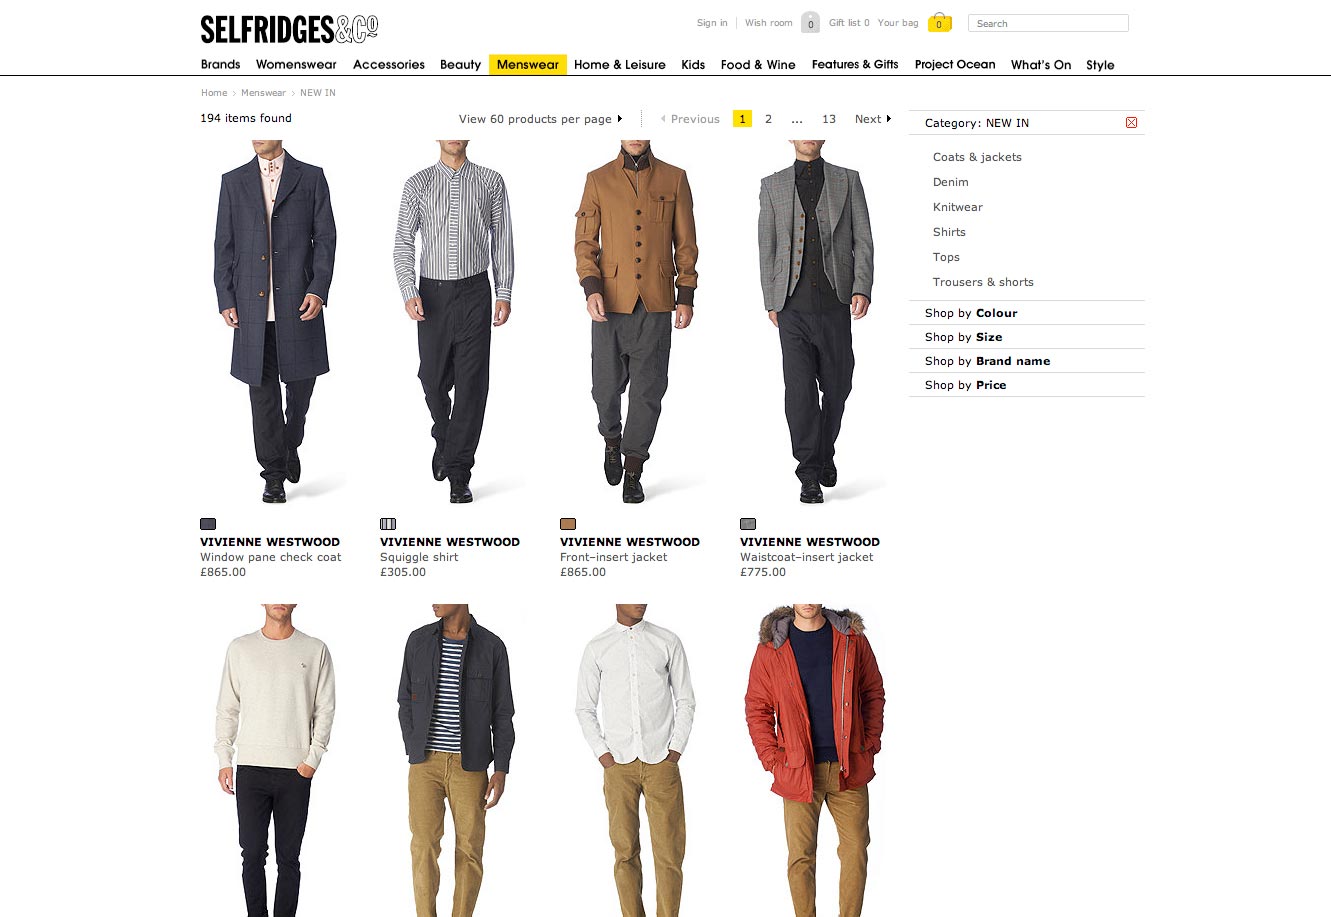 28+ Best Men’s Online Shopping / Clothing Stores (2011 Edition) - D'Marge